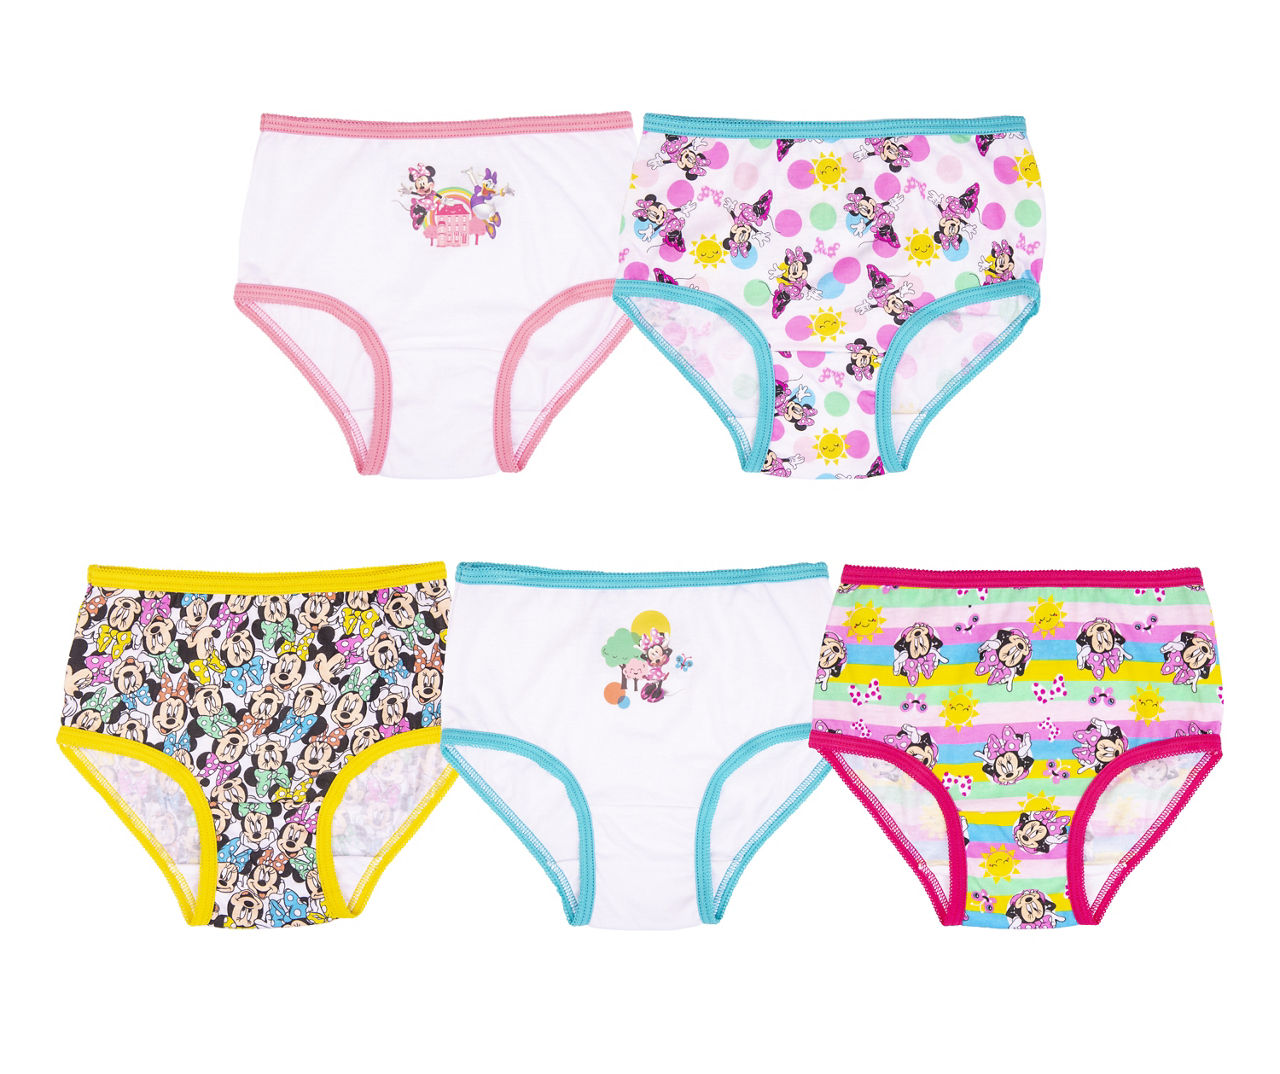 Toddler Size 4T White, Pink & Blue Briefs With Coloring Page, 5